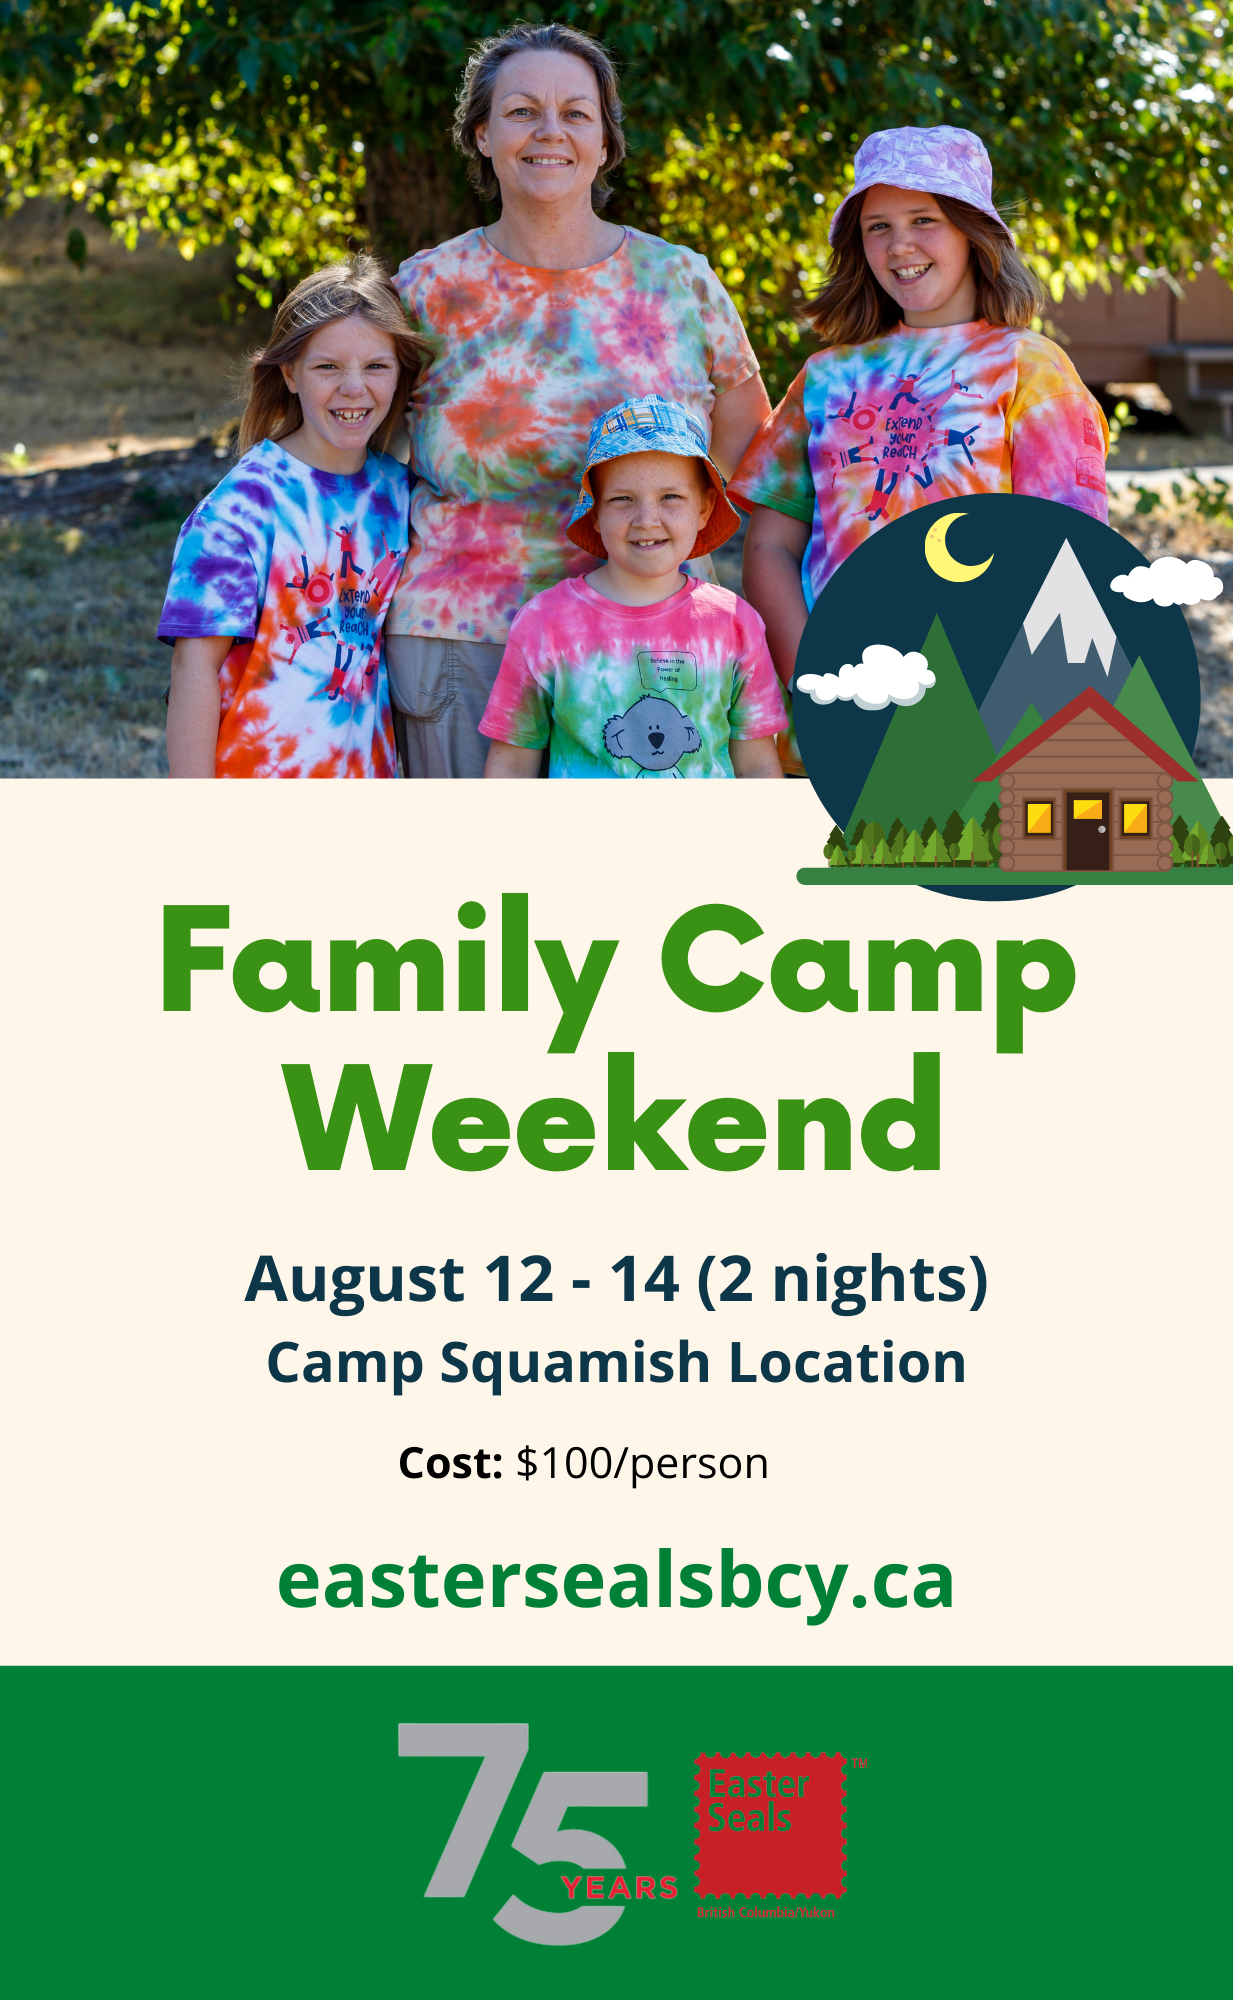 Easter Seals Overnight Family Camp (Squamish)